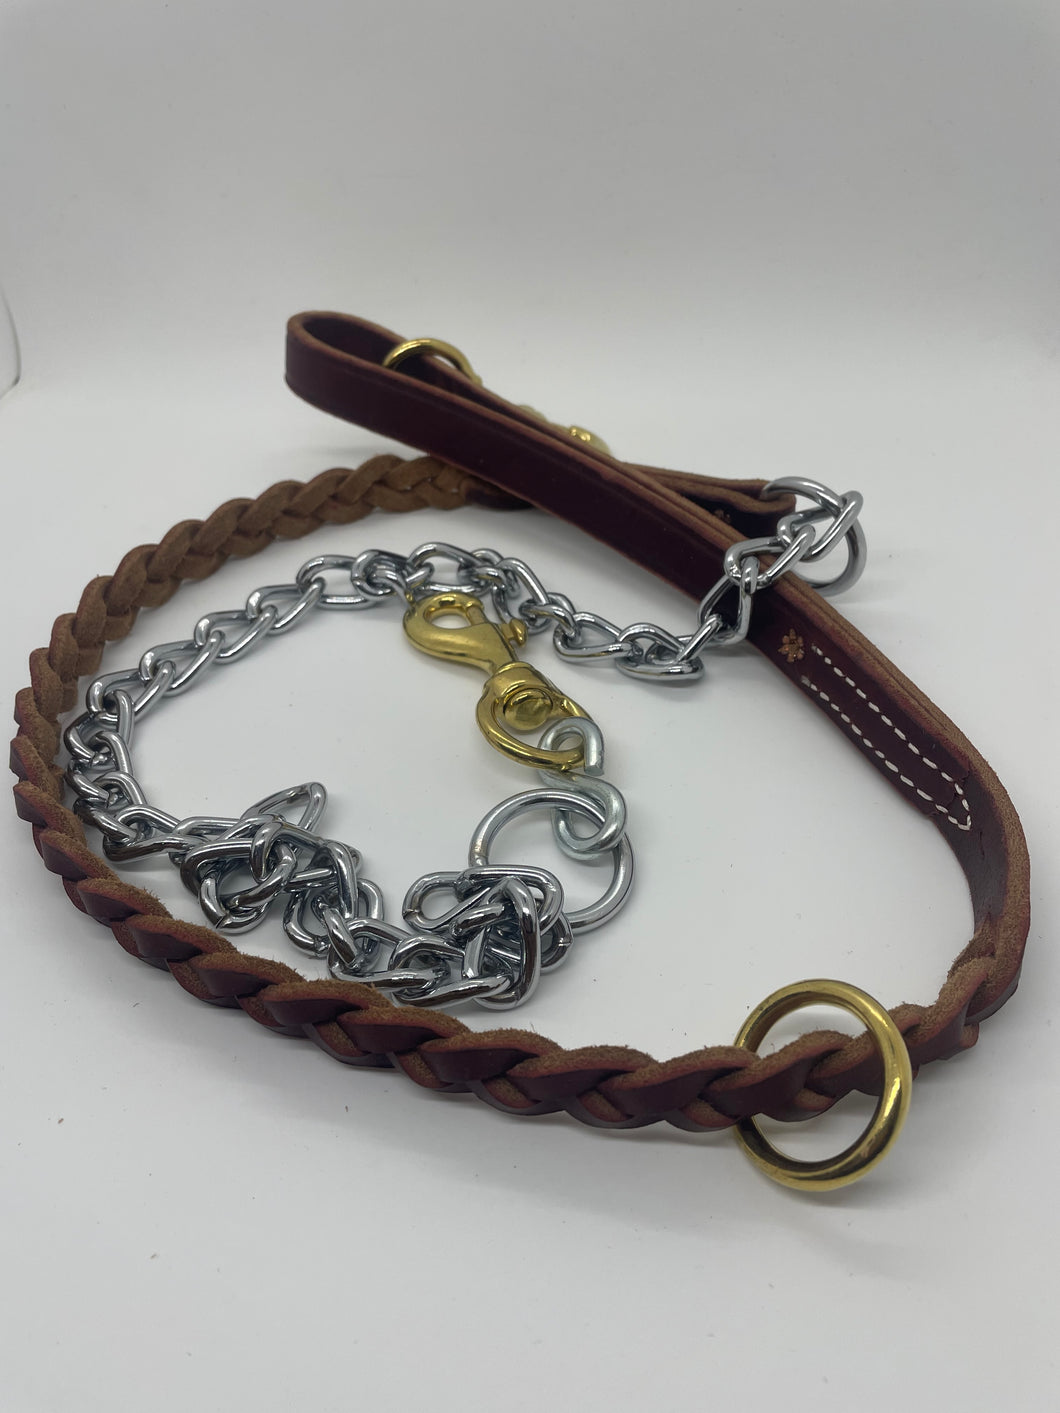 Braided leather/chain lead